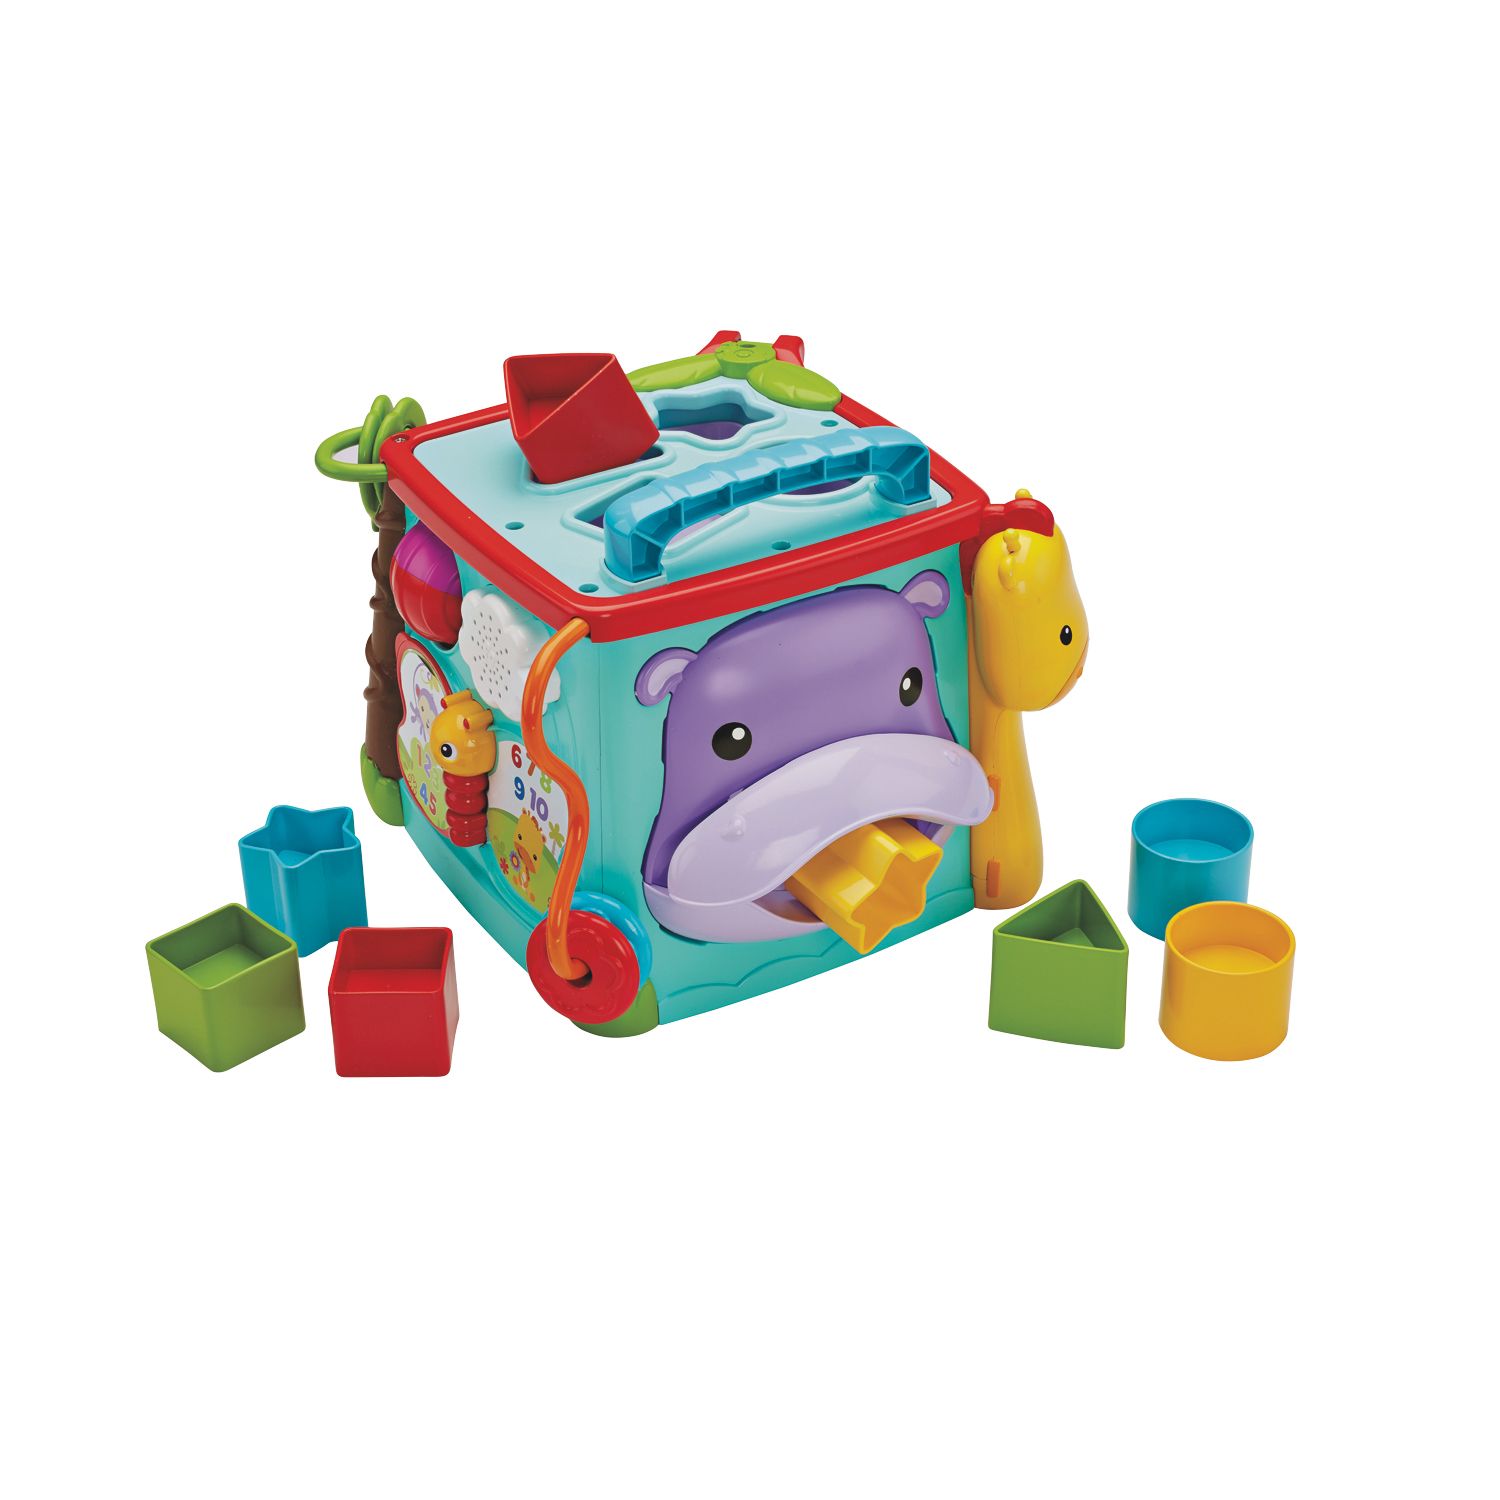 busy learning activity cube